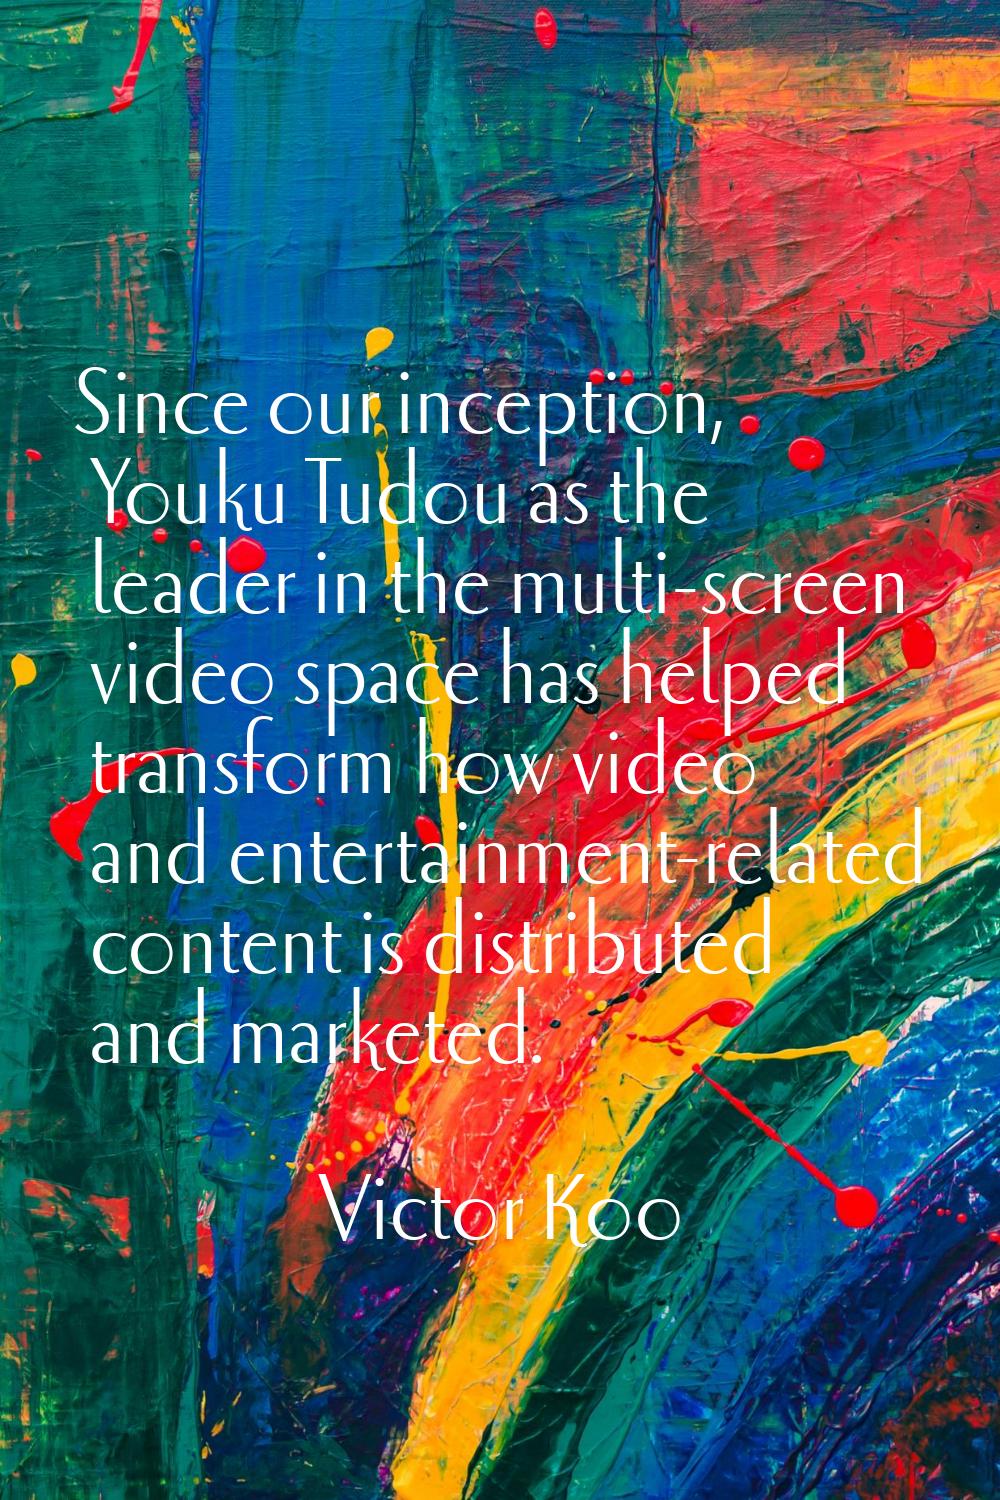 Since our inception, Youku Tudou as the leader in the multi-screen video space has helped transform